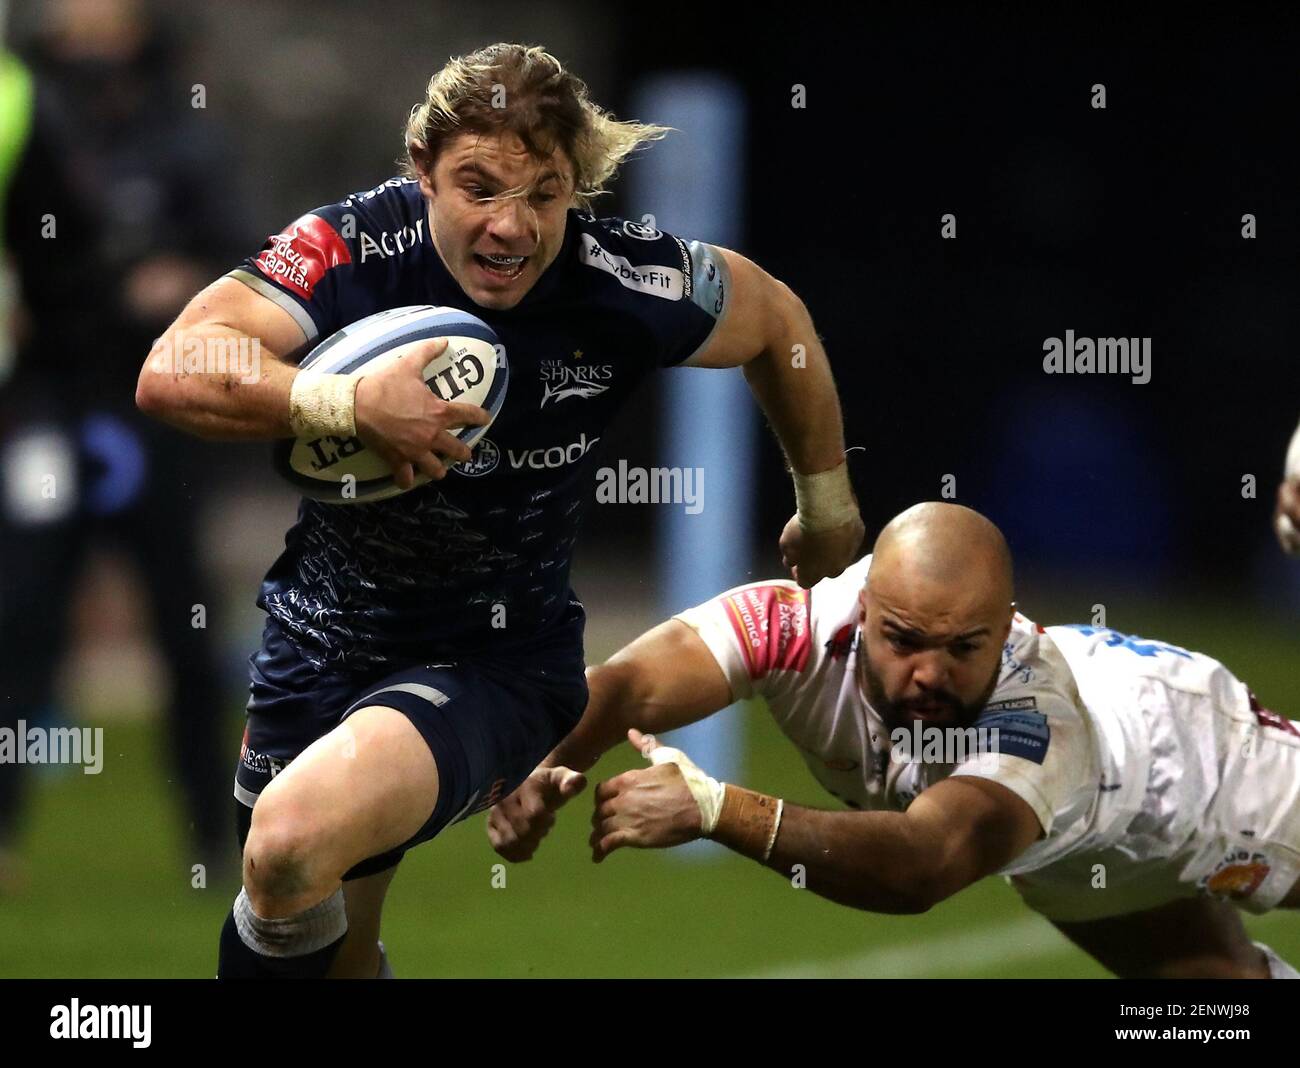 Sale Sharks Faf de Klerk evades a tackle from Exeter Chiefs Tom Oâ€™Flaherty during the Gallagher Premiership match at the AJ Bell Stadium, Barton-upon-Irwell